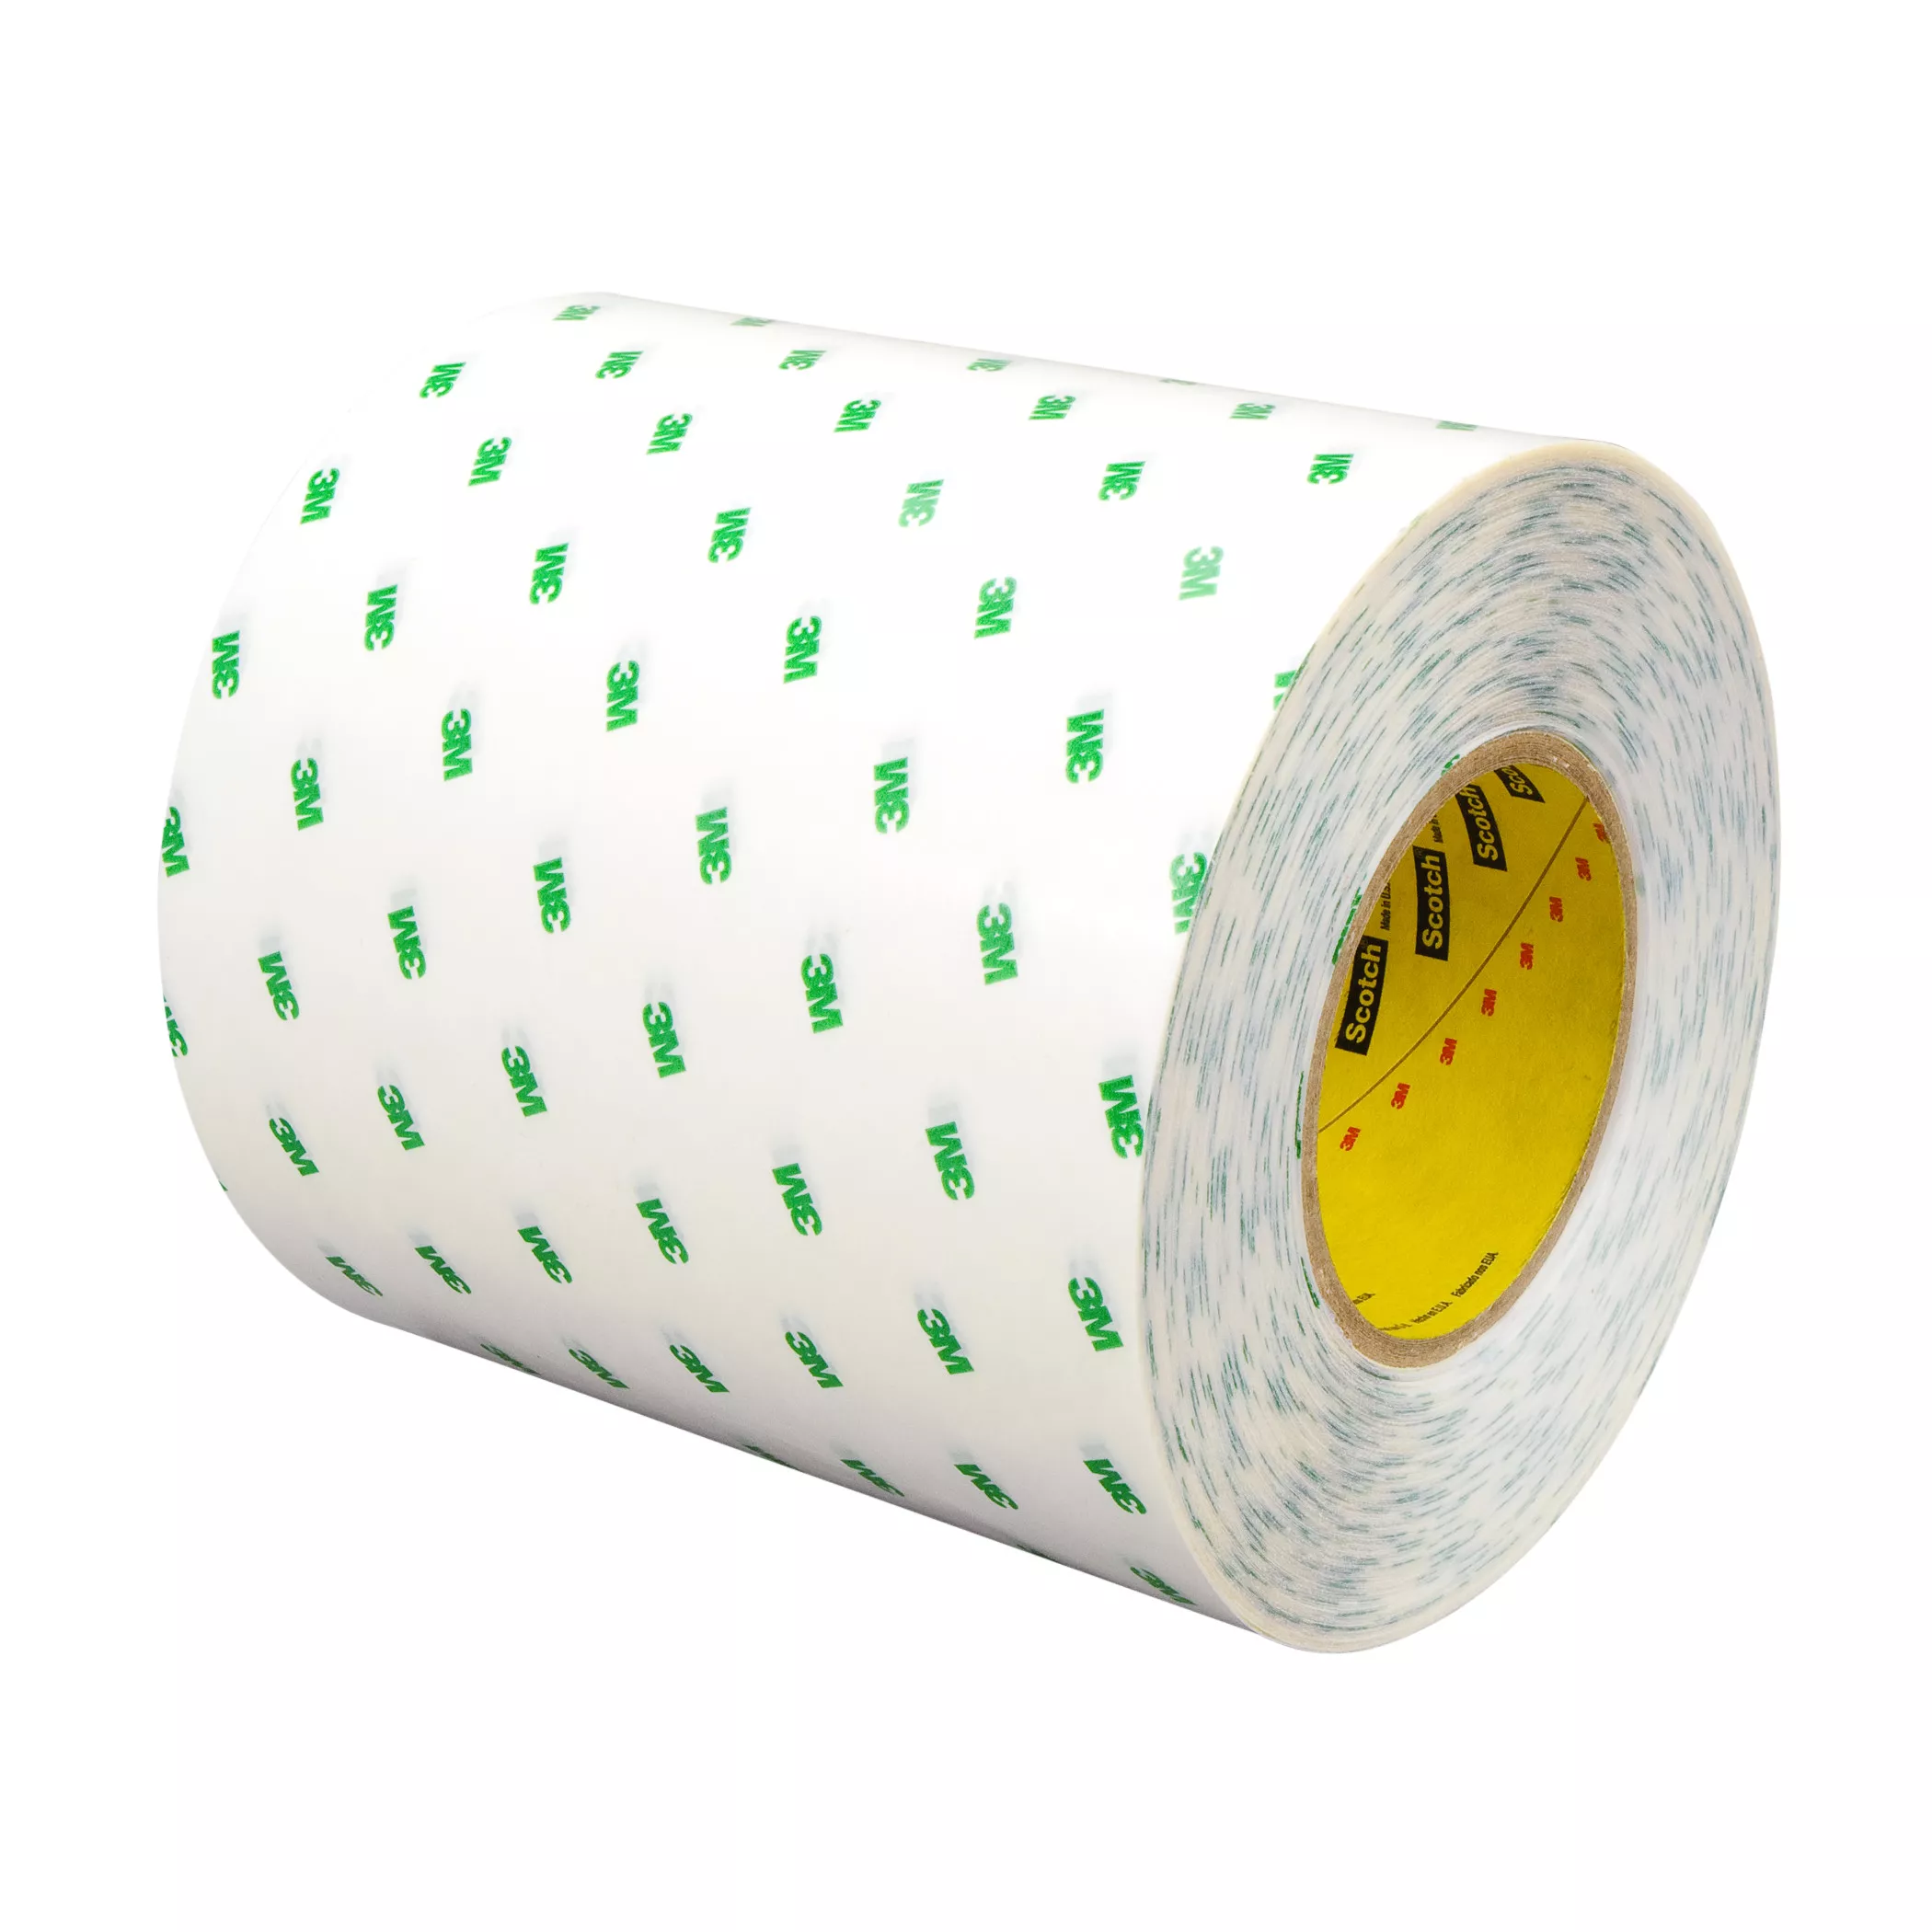 3M™ Ultra High Temperature Adhesive Transfer Tape 9085, Clear, 1/4 in x
60 yd, 5 mil, 144 Roll/Case